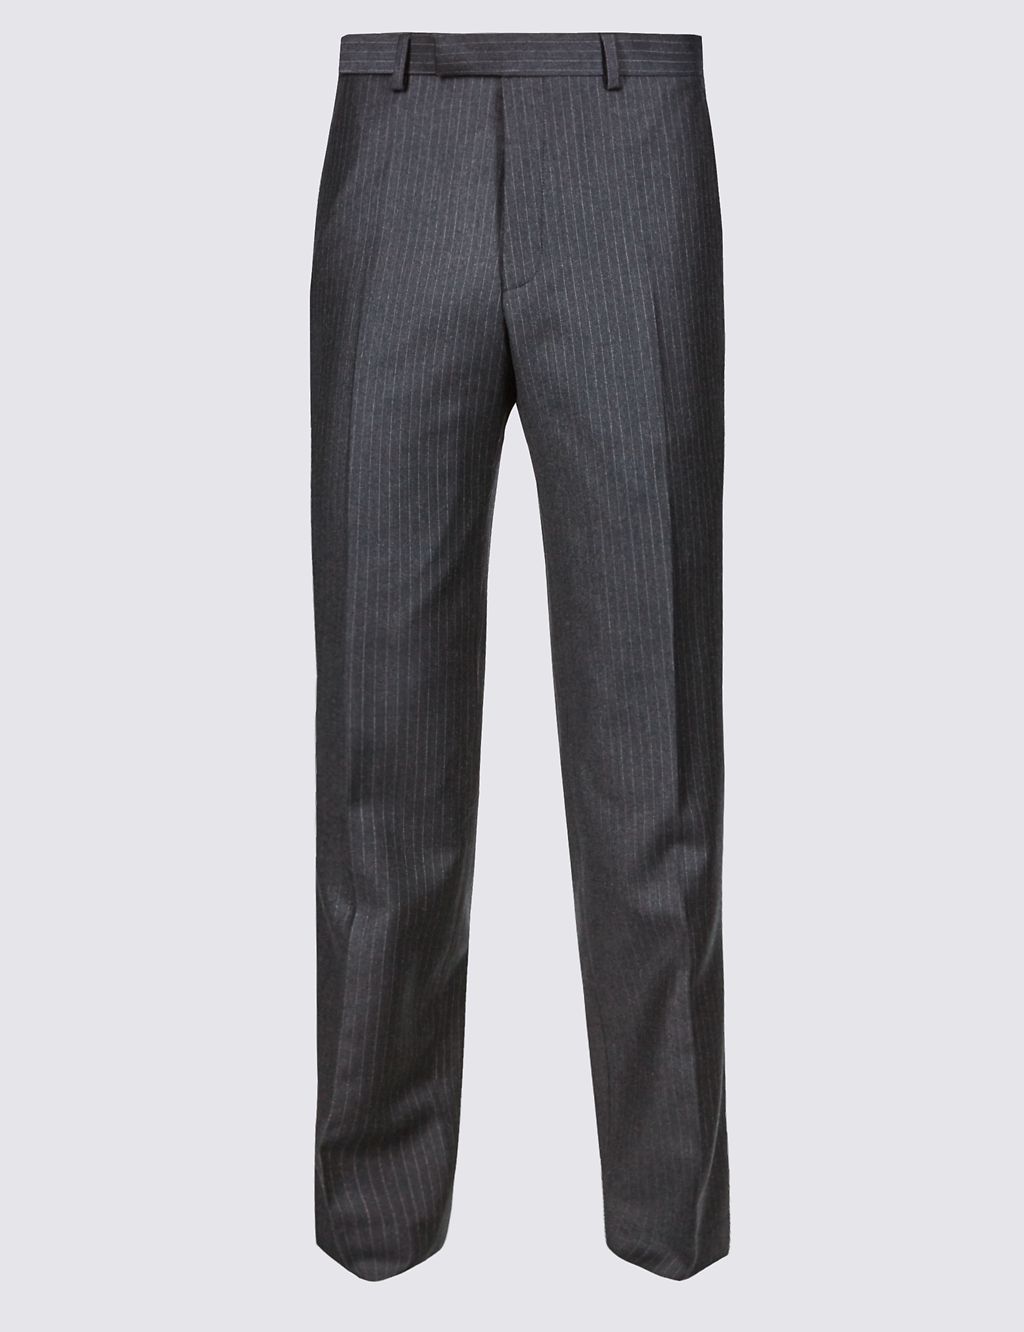 Charcoal Striped Tailored Fit Wool Trousers 1 of 4